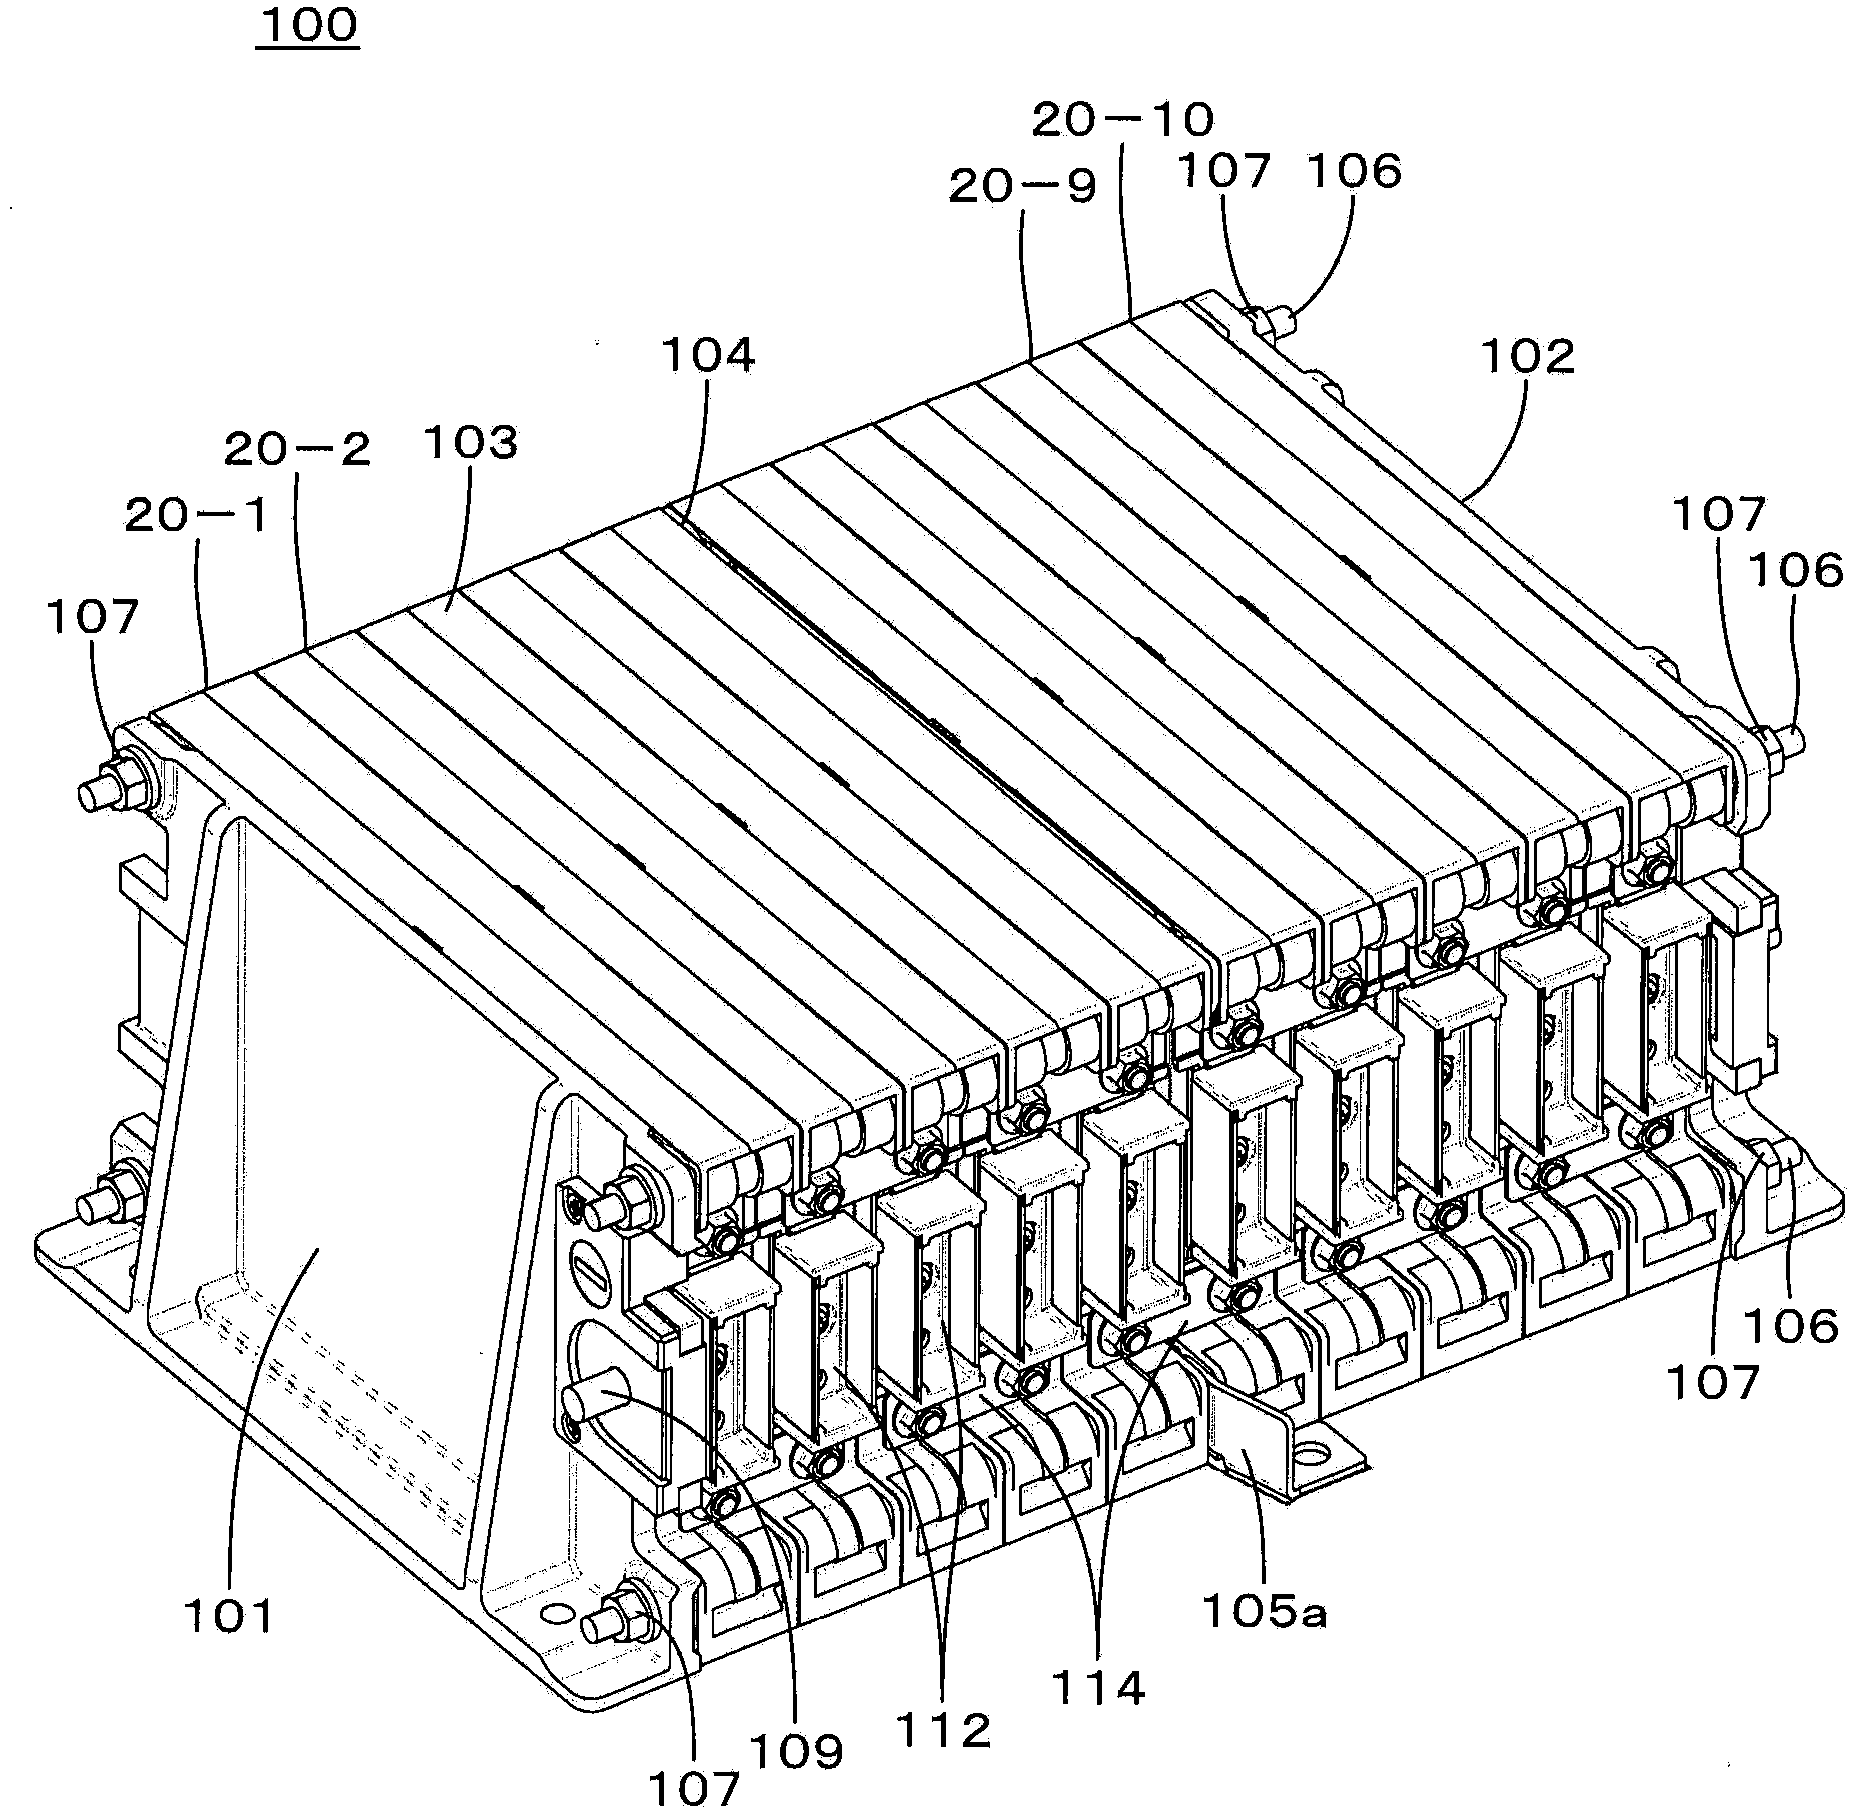 Galvanic unit, galvanic module, power storage system, electronic equipment, electric power system, and electric vehicle